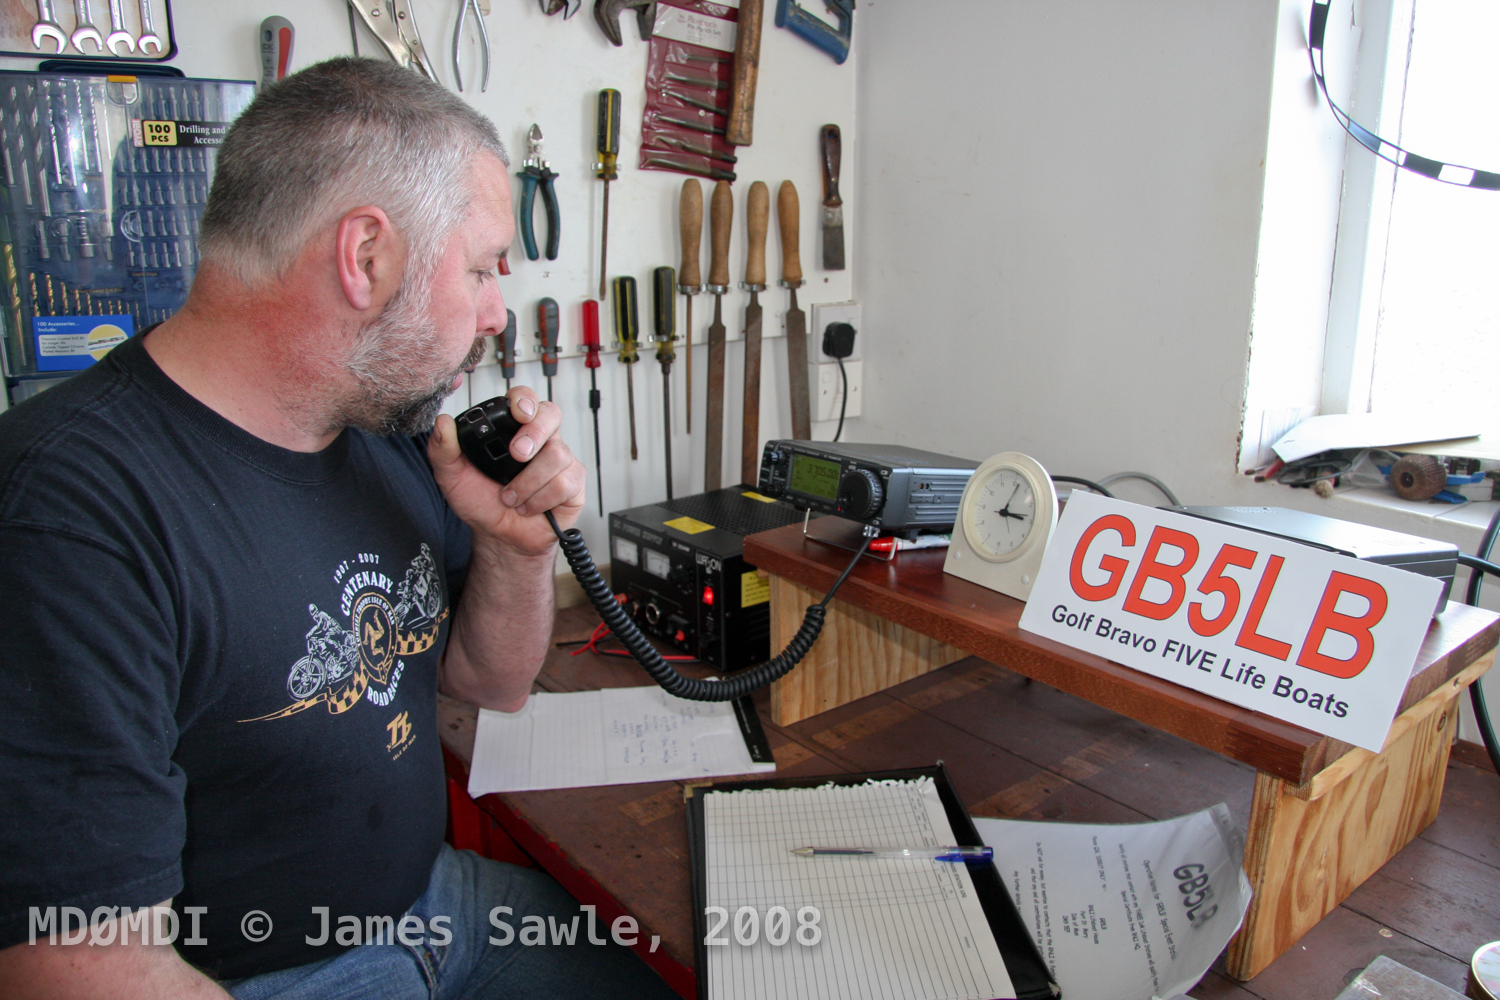 Steve Kelly (GD7DUZ) manning the radio at the Port Erin Special Event Station (GB5LB)